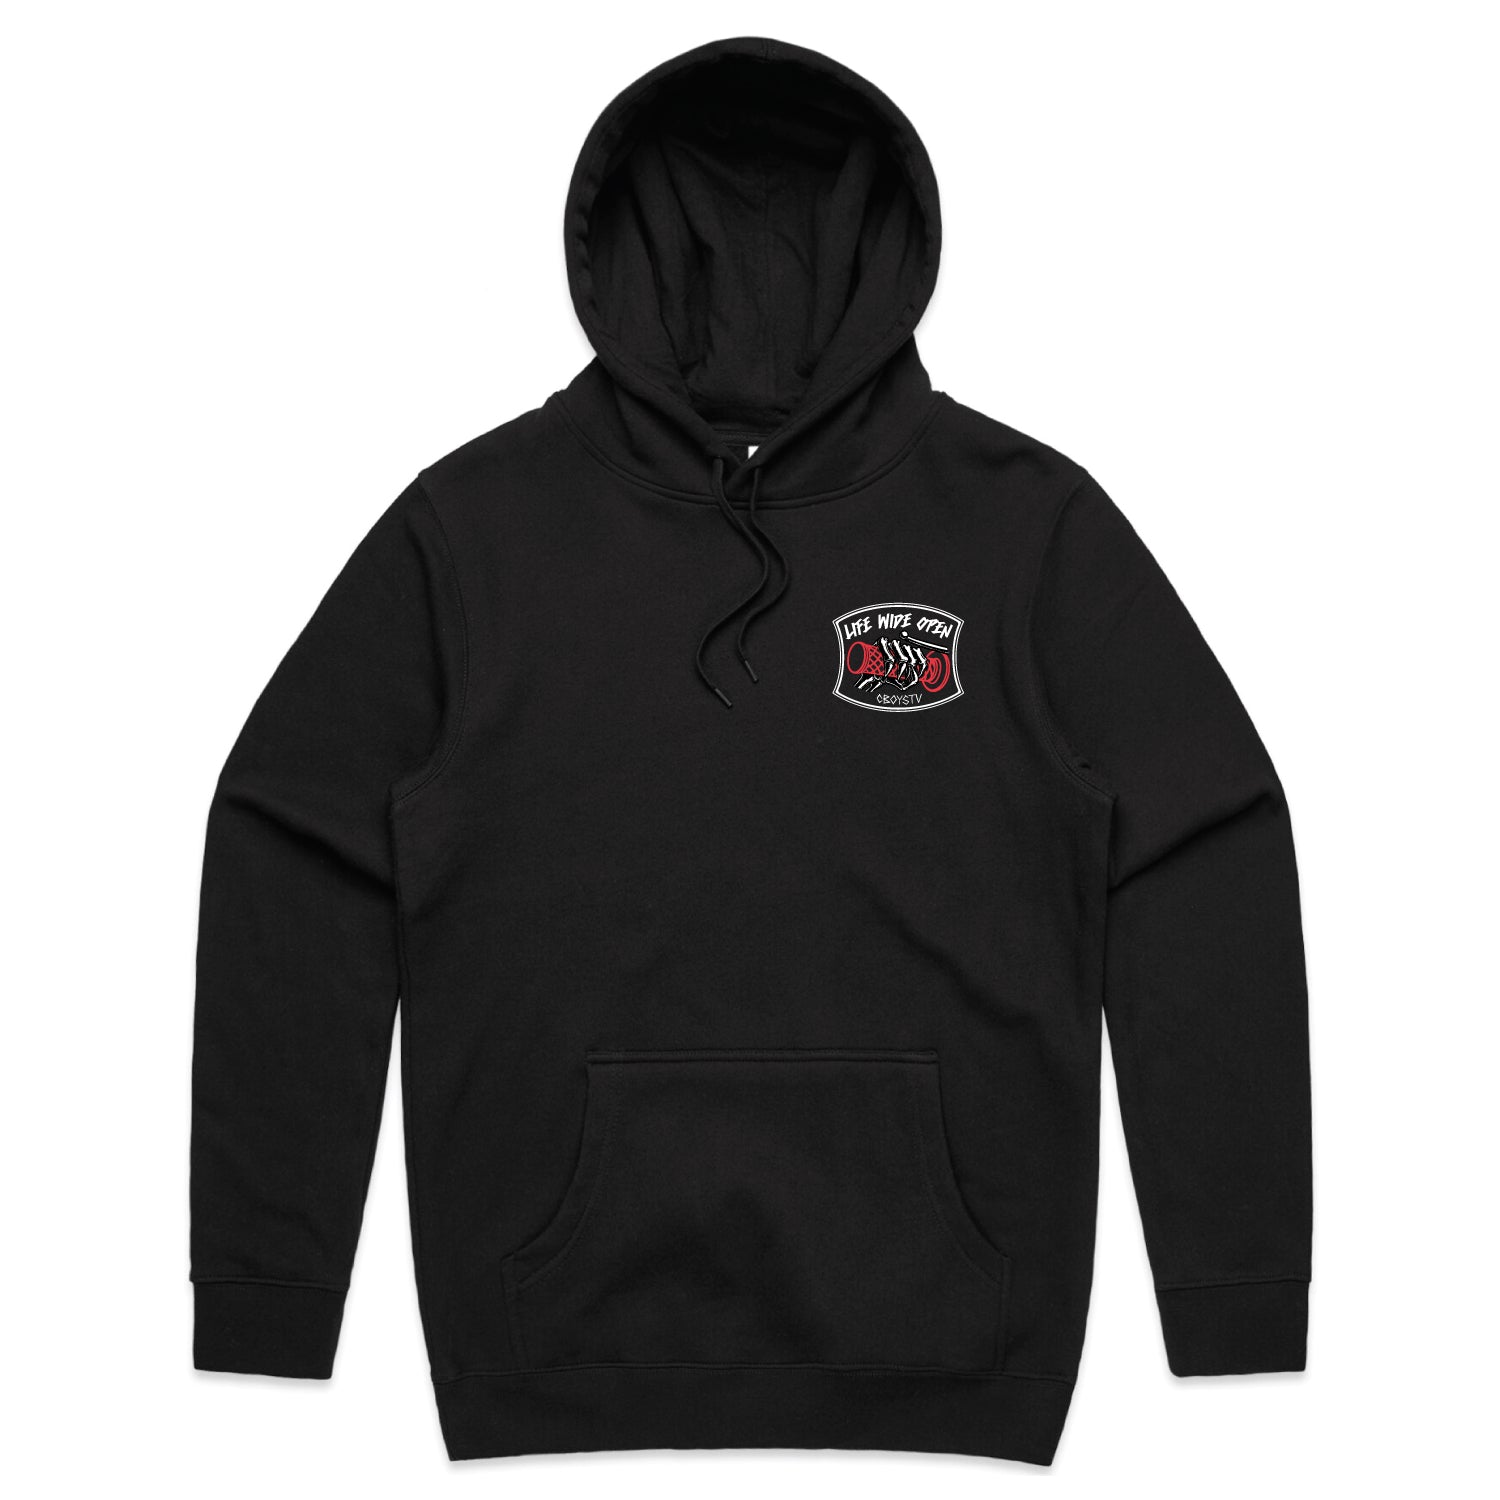 Till The Wheels Fall Off Hoodie